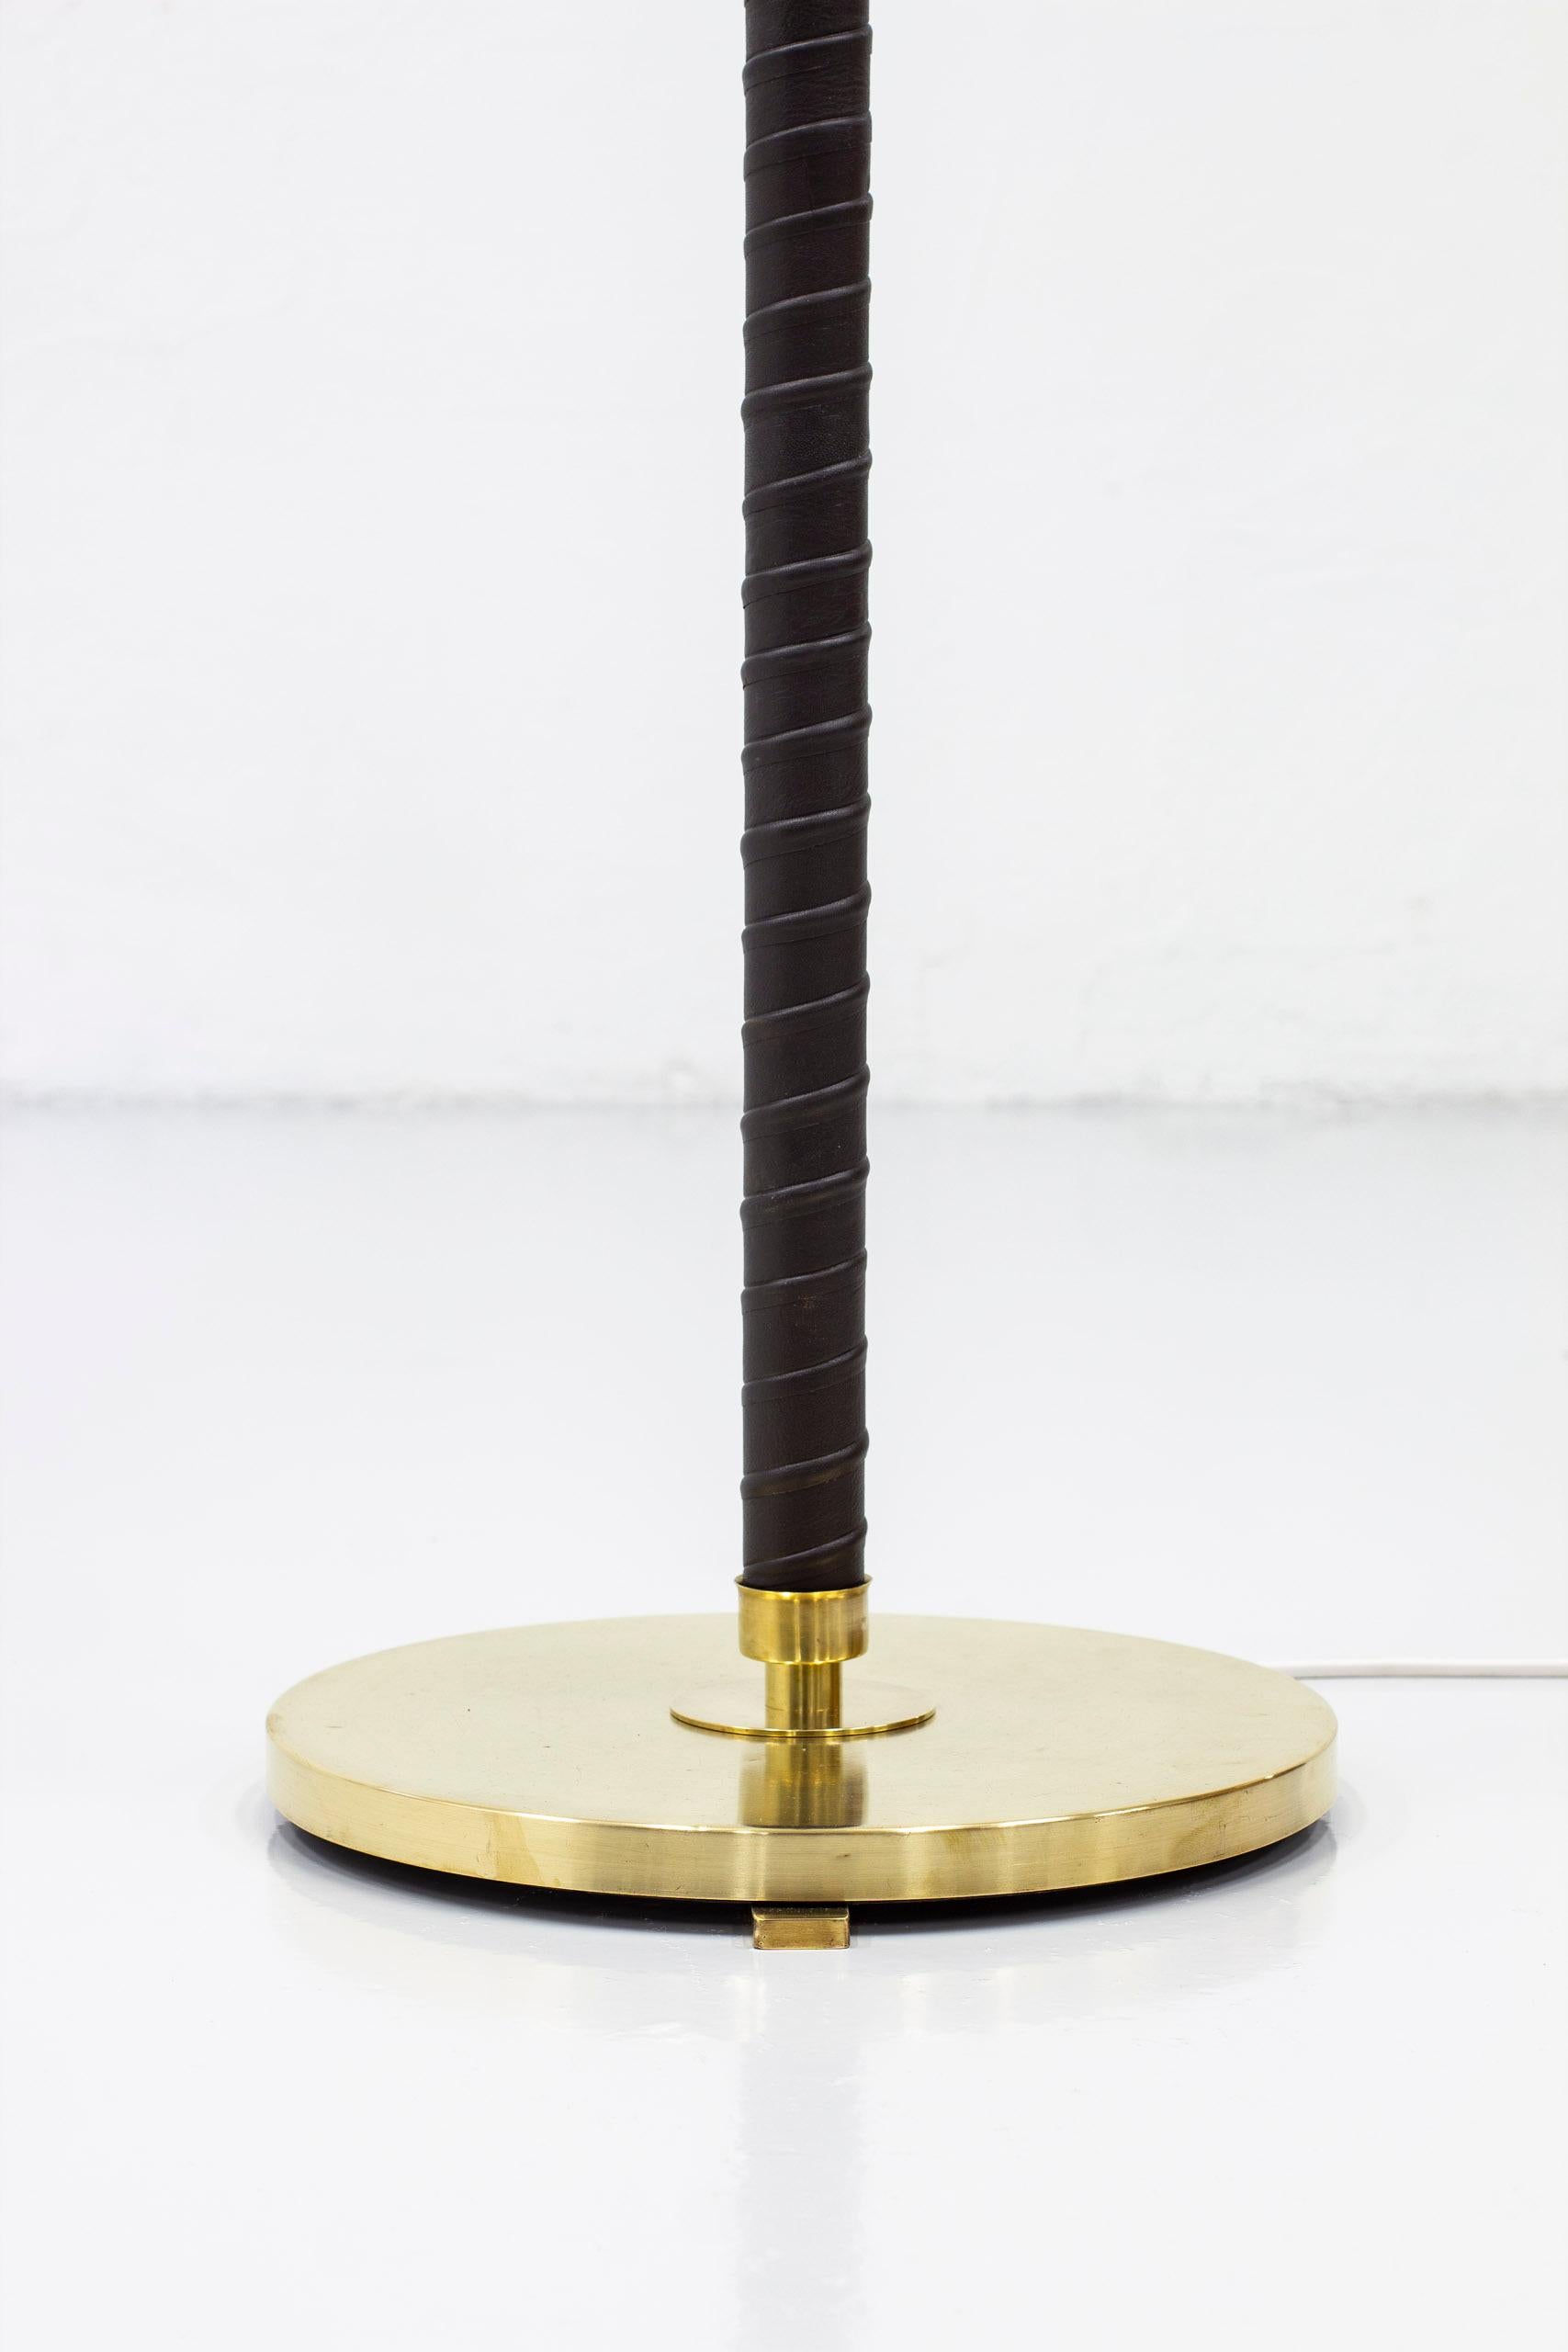 Swedish Floor Lamp in Brass and Leather by ASEA, Sweden, 1940s